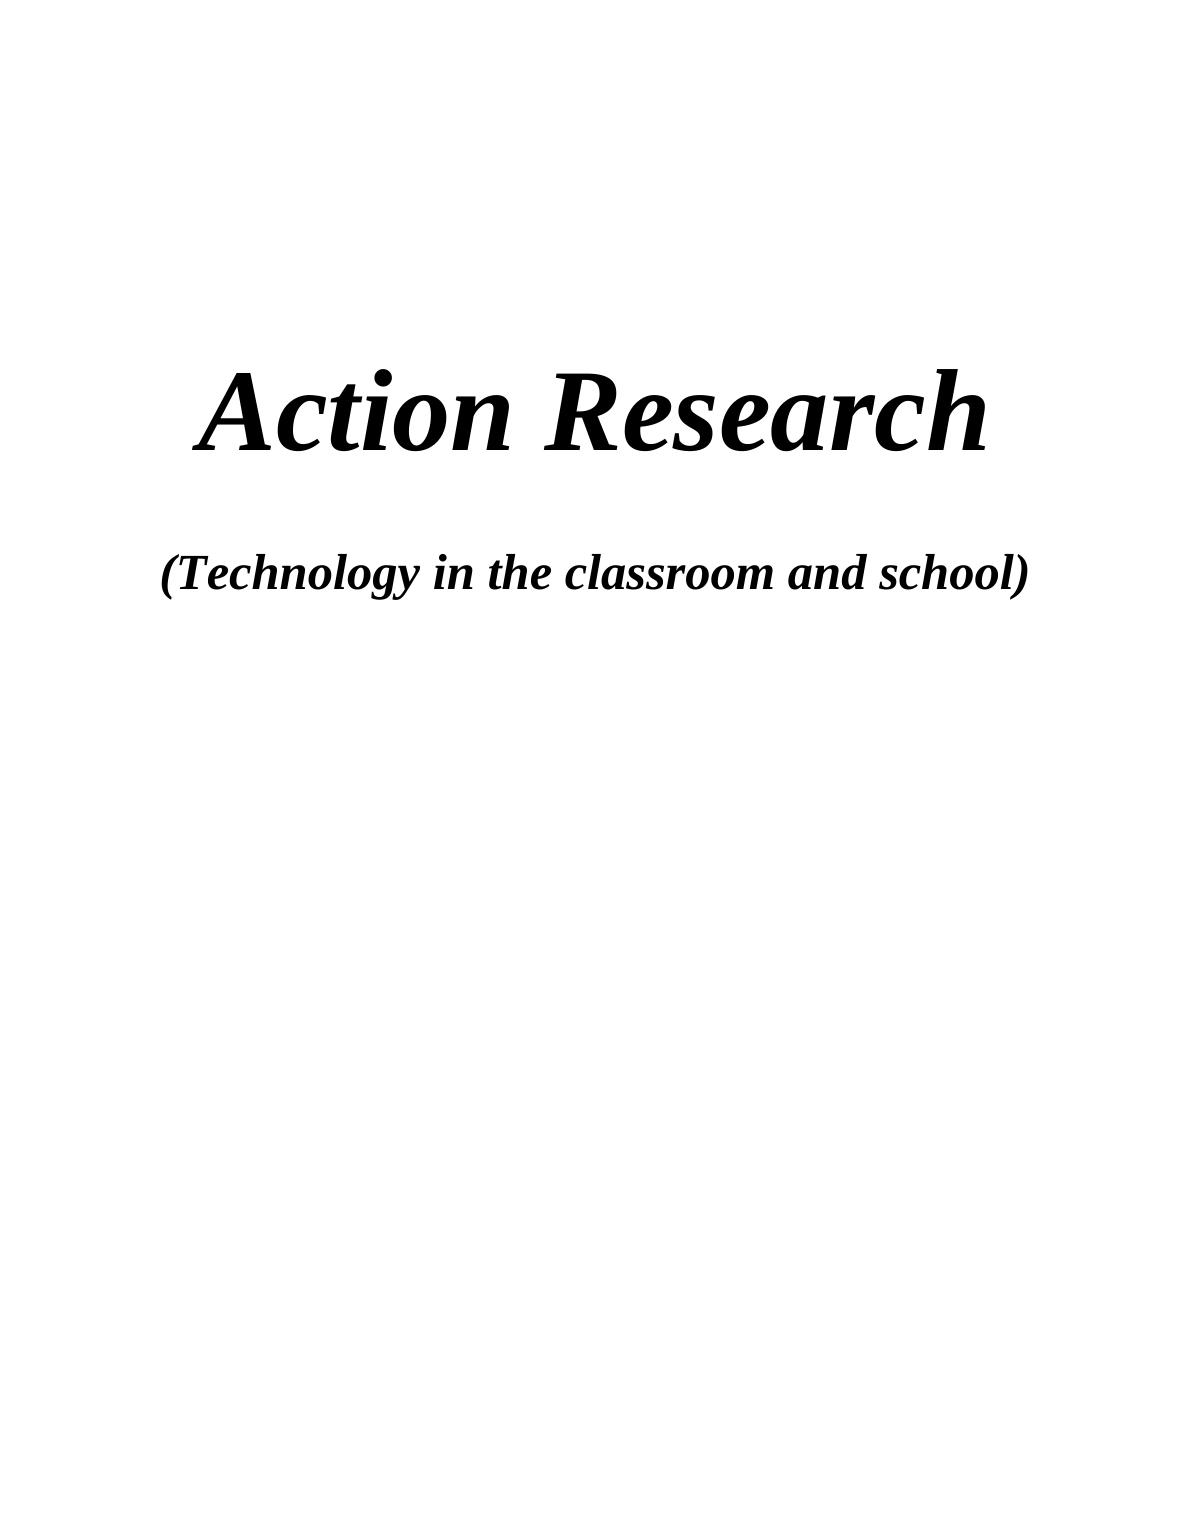 action research on technology in the classroom